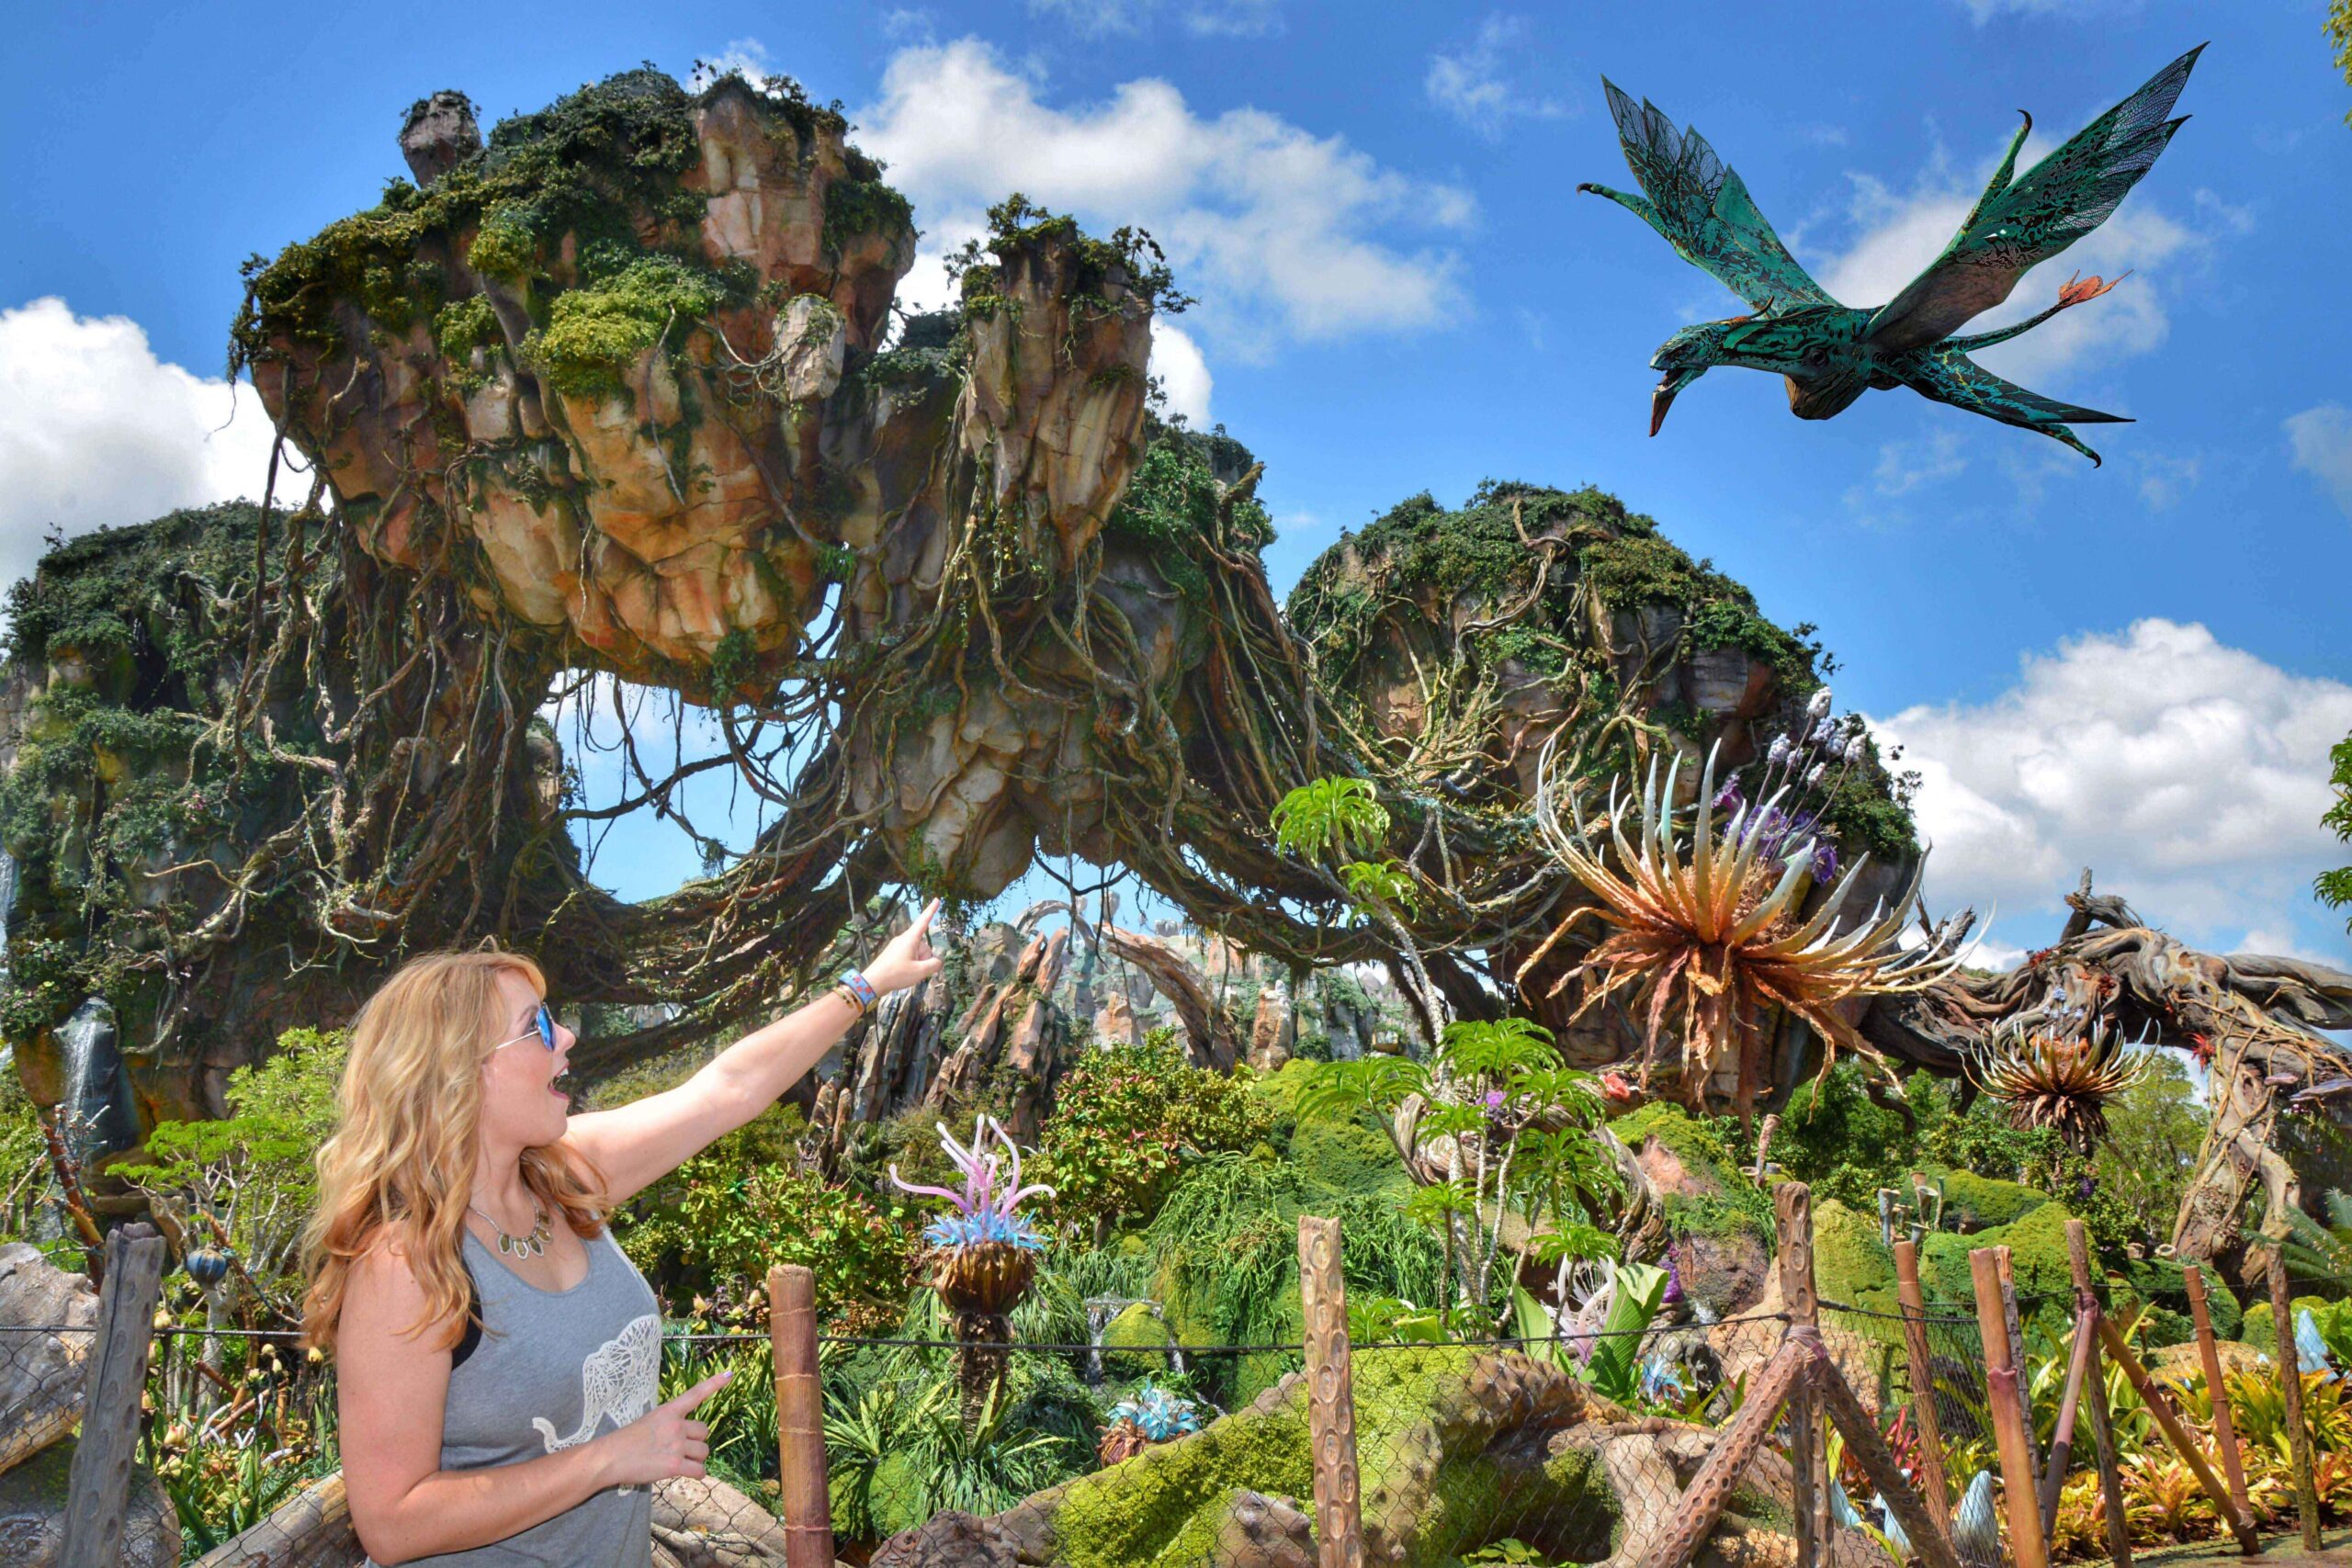 Pandora The World of Review - Living By Disney